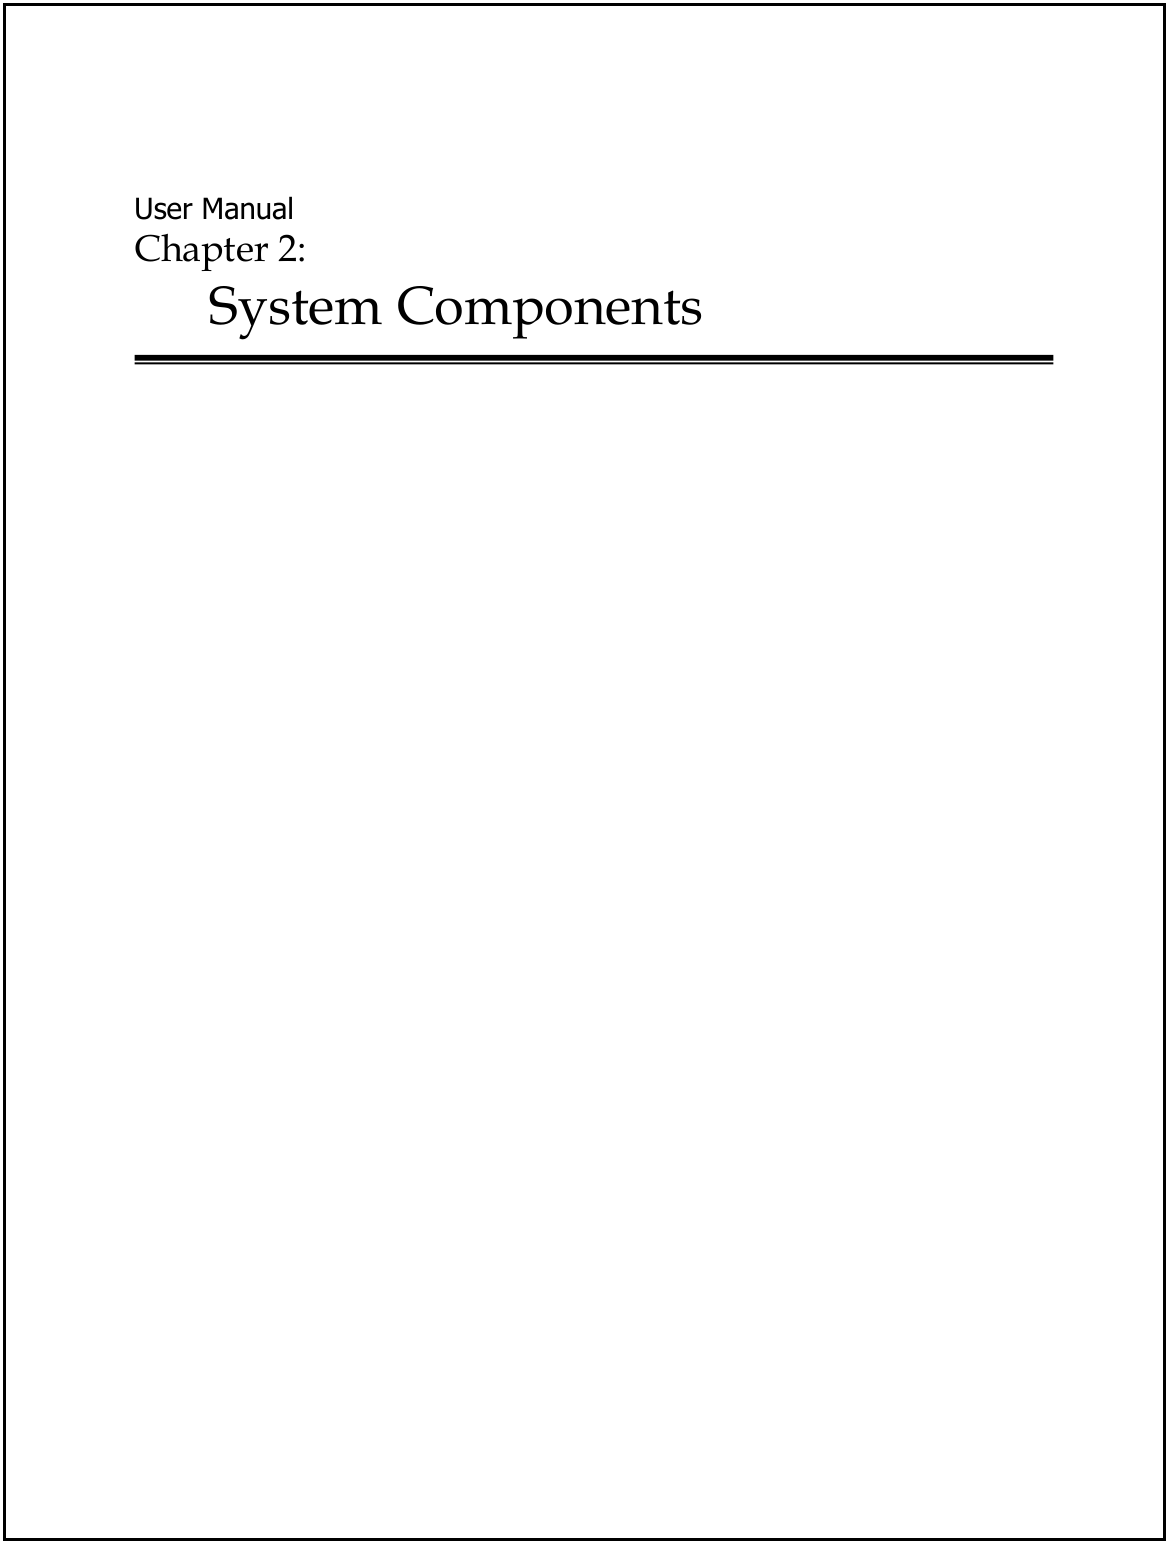  User Manual Chapter 2:  System Components      